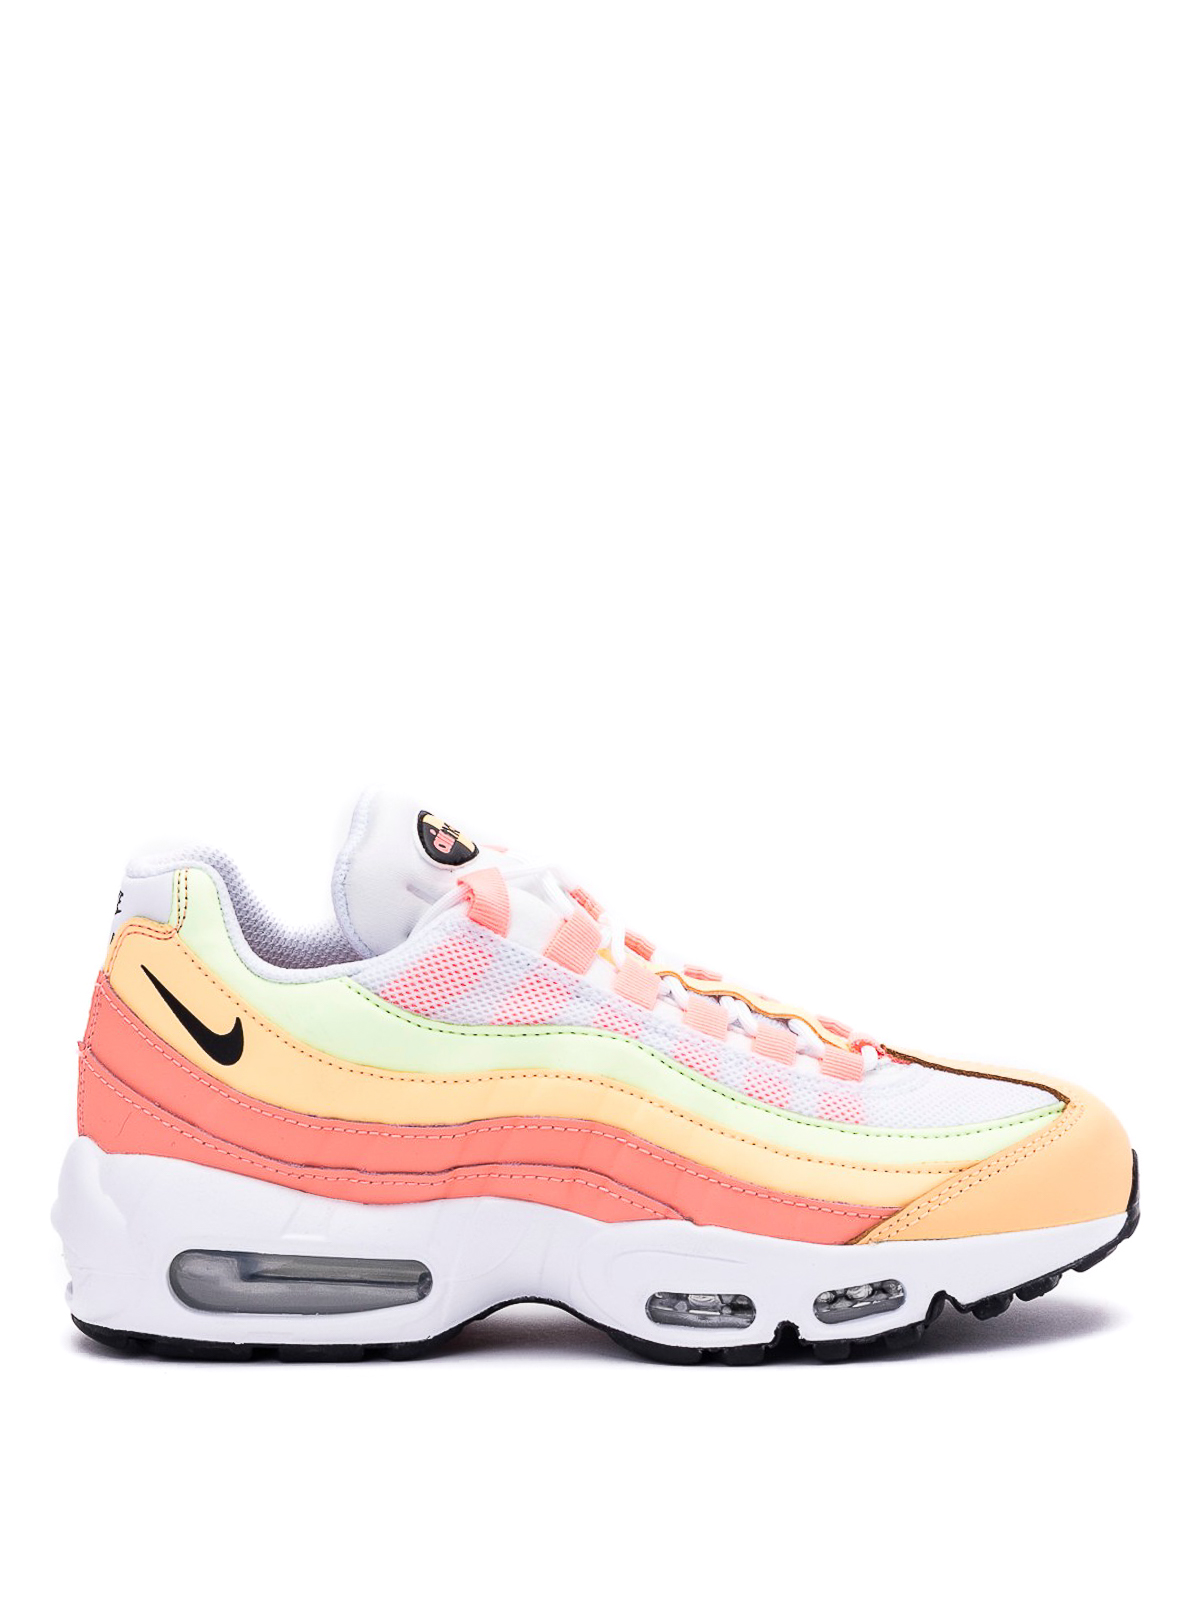 Trainers Nike - Air 95 sneakers CZ5659600